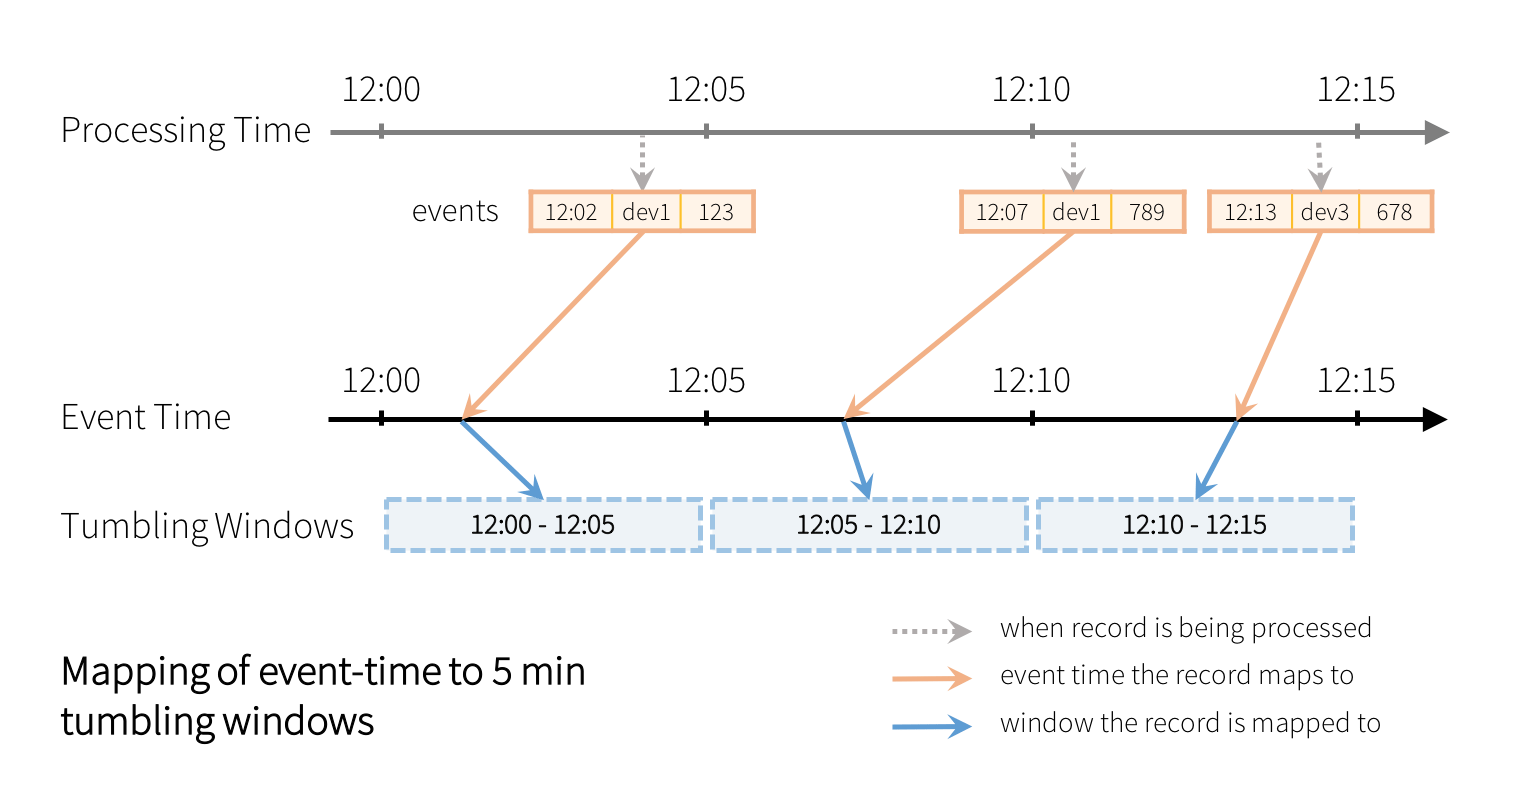 Mapping of event-time to 5 min tumbling windows